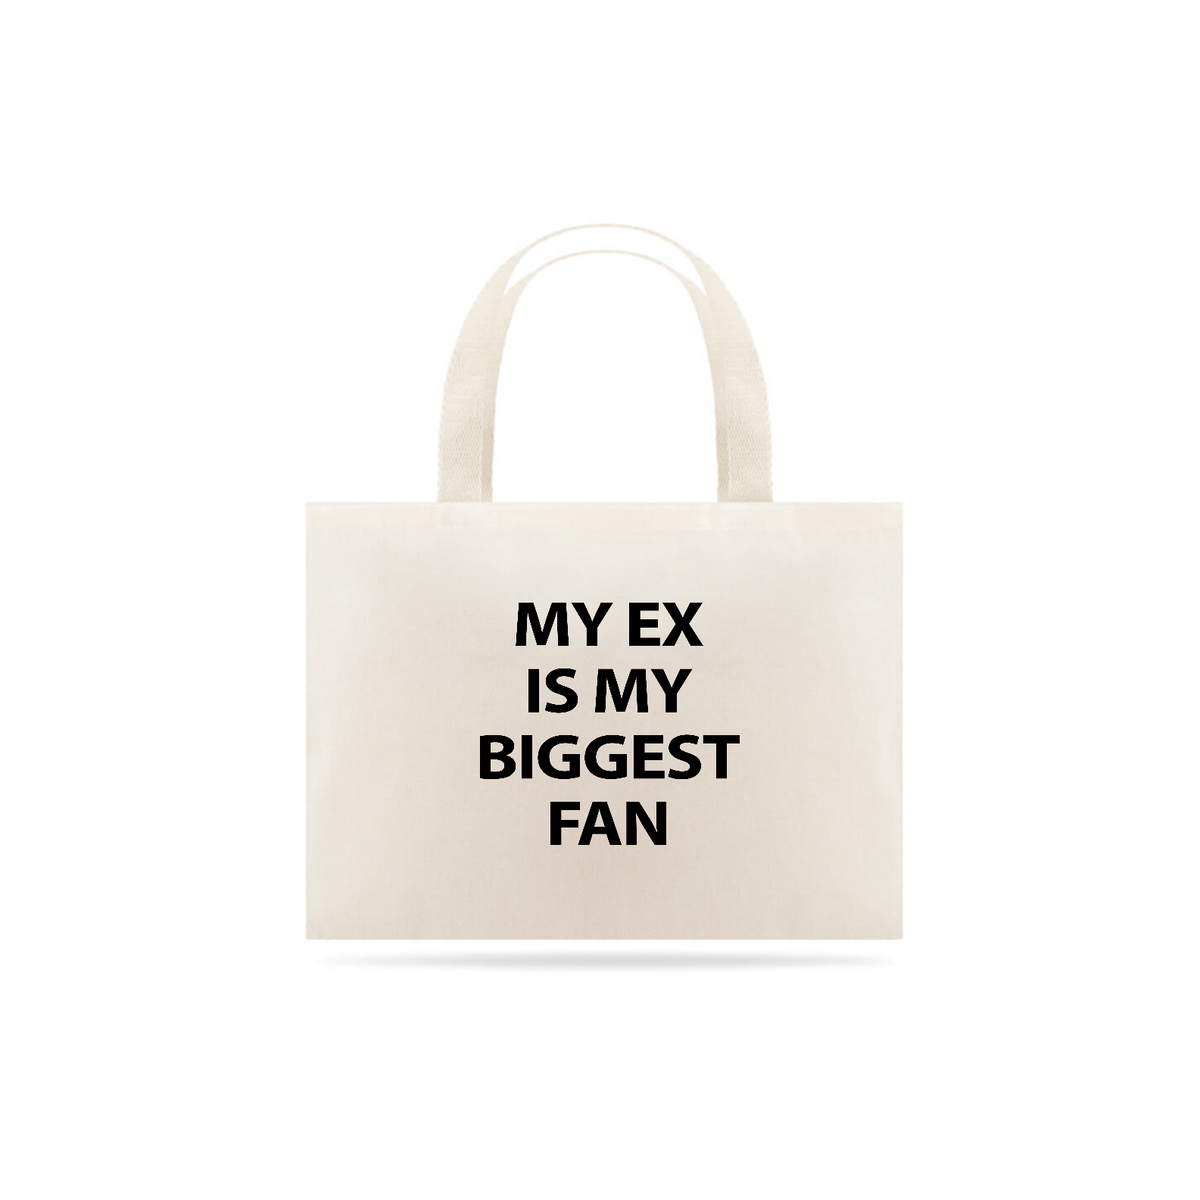 Nome do produto: ECOBAG - MY EX IS MY BIGGEST FAN